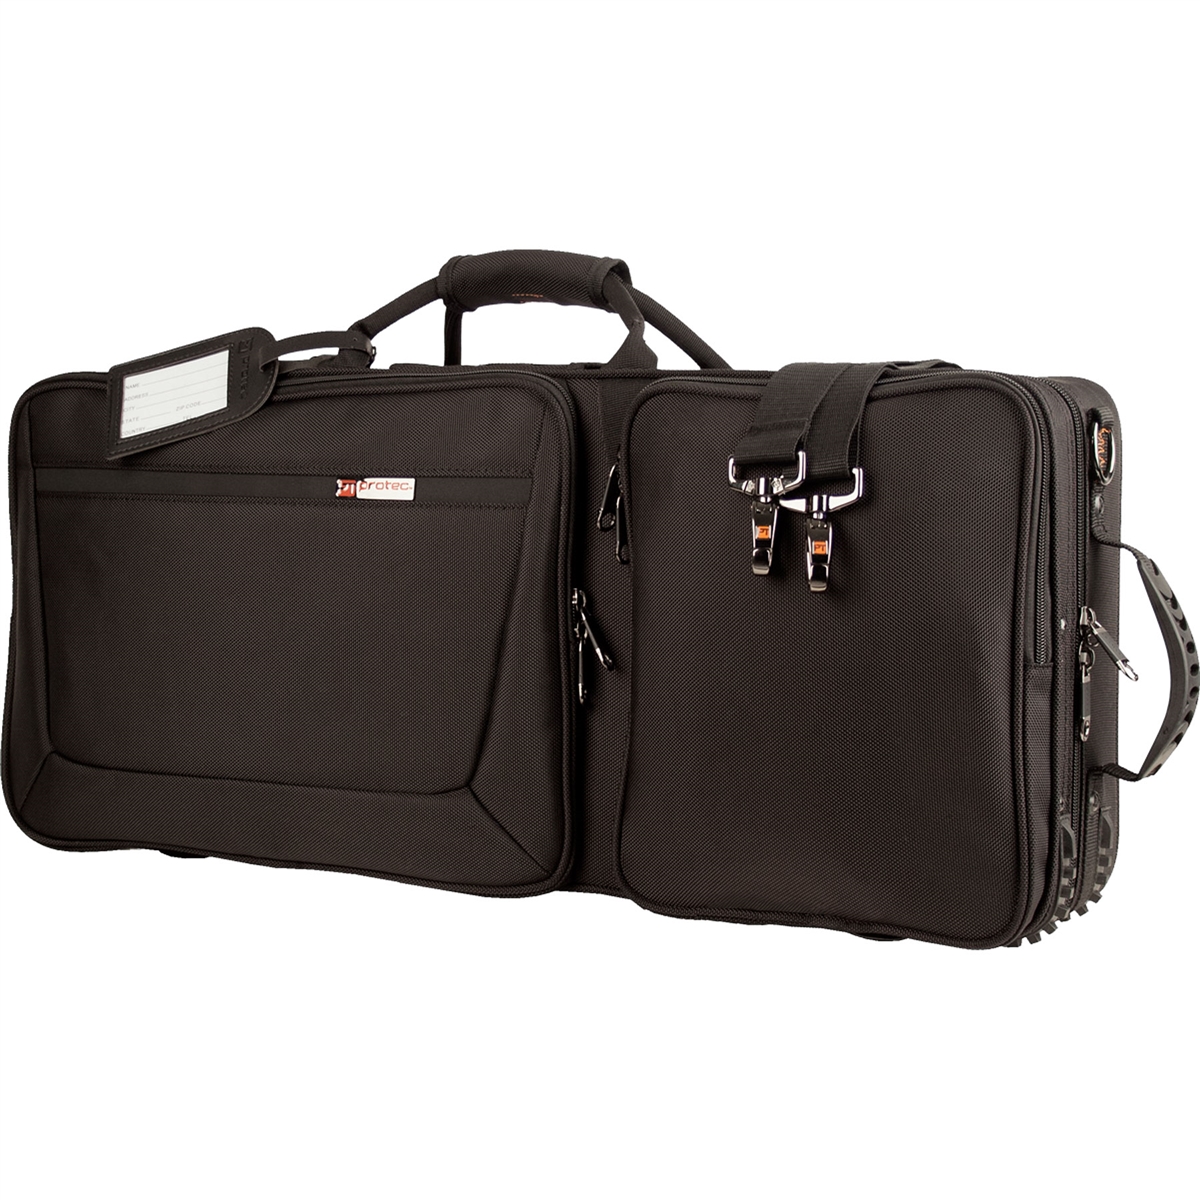 Protec PB317 Case for Bassoon